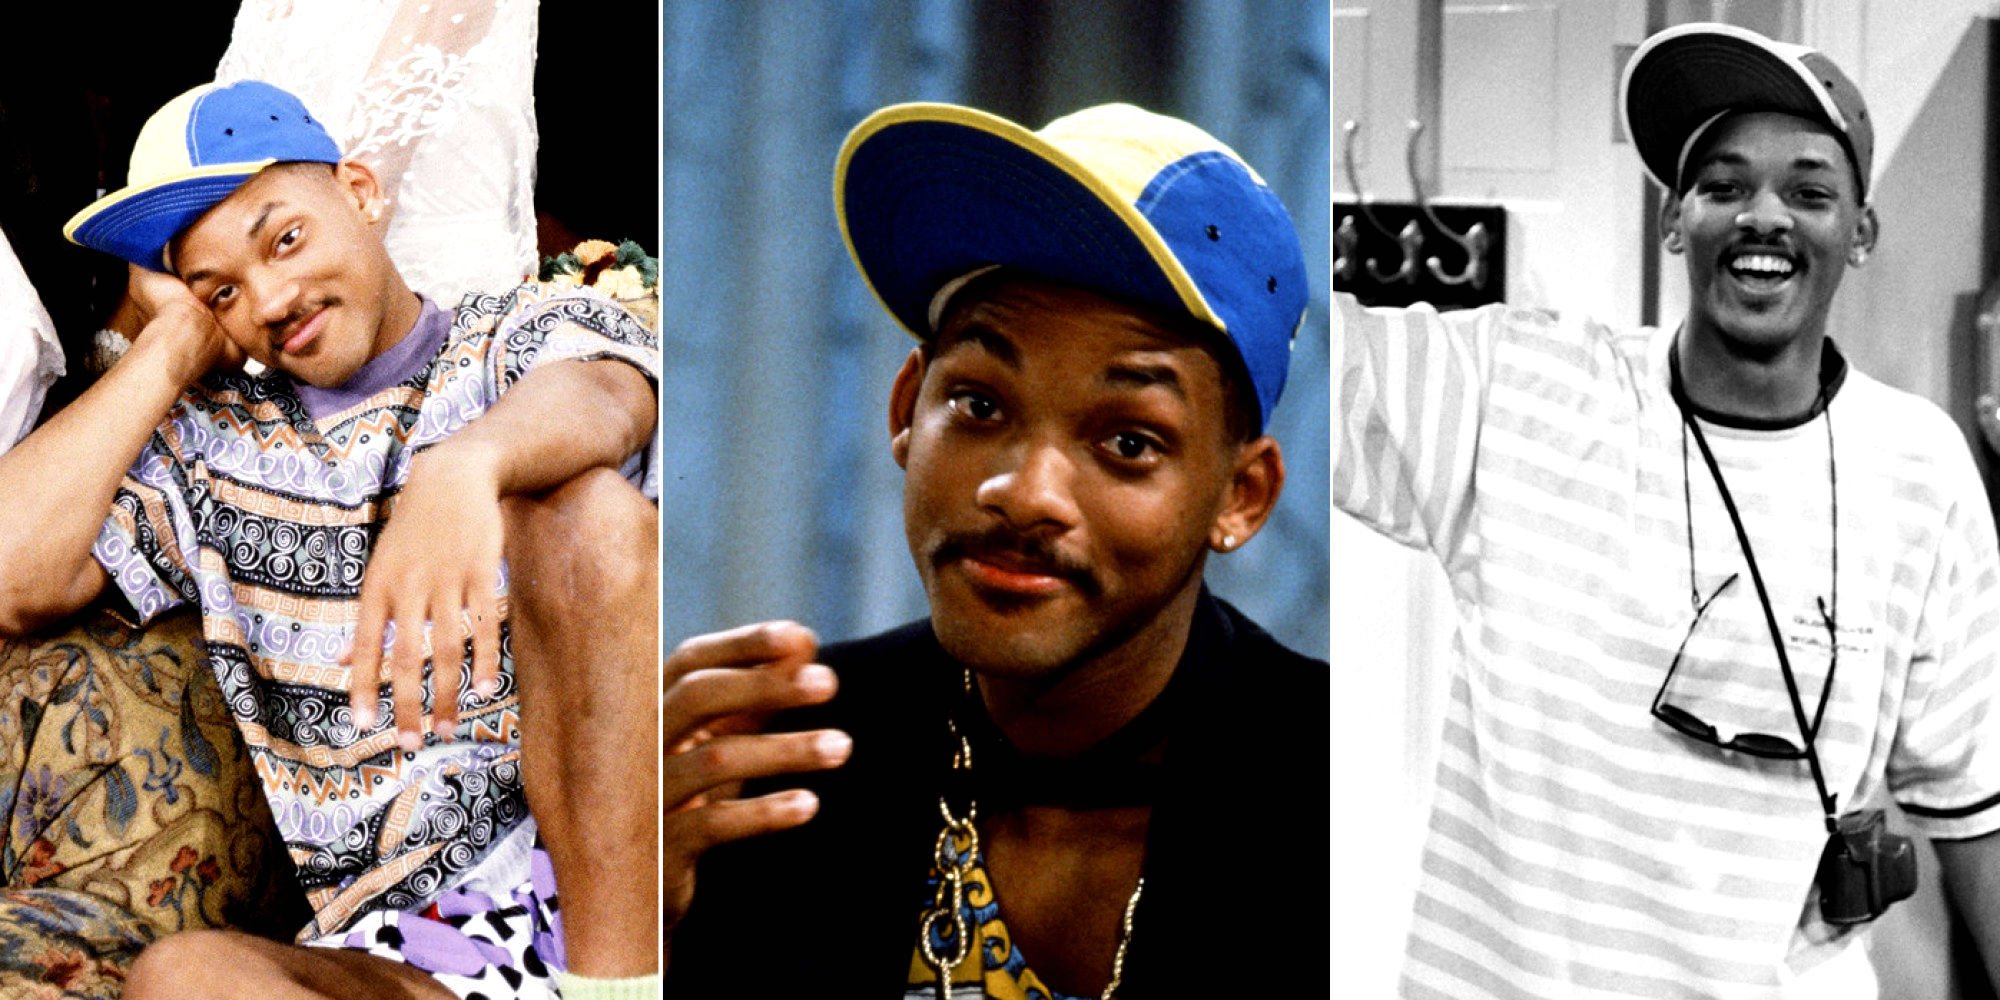 fresh prince of bel air, Comedy, Sitcom, Series, Television, Will, Smith, Fresh, Prince, Bel, Air, Hip, Hop, Rapper, Rap Wallpaper